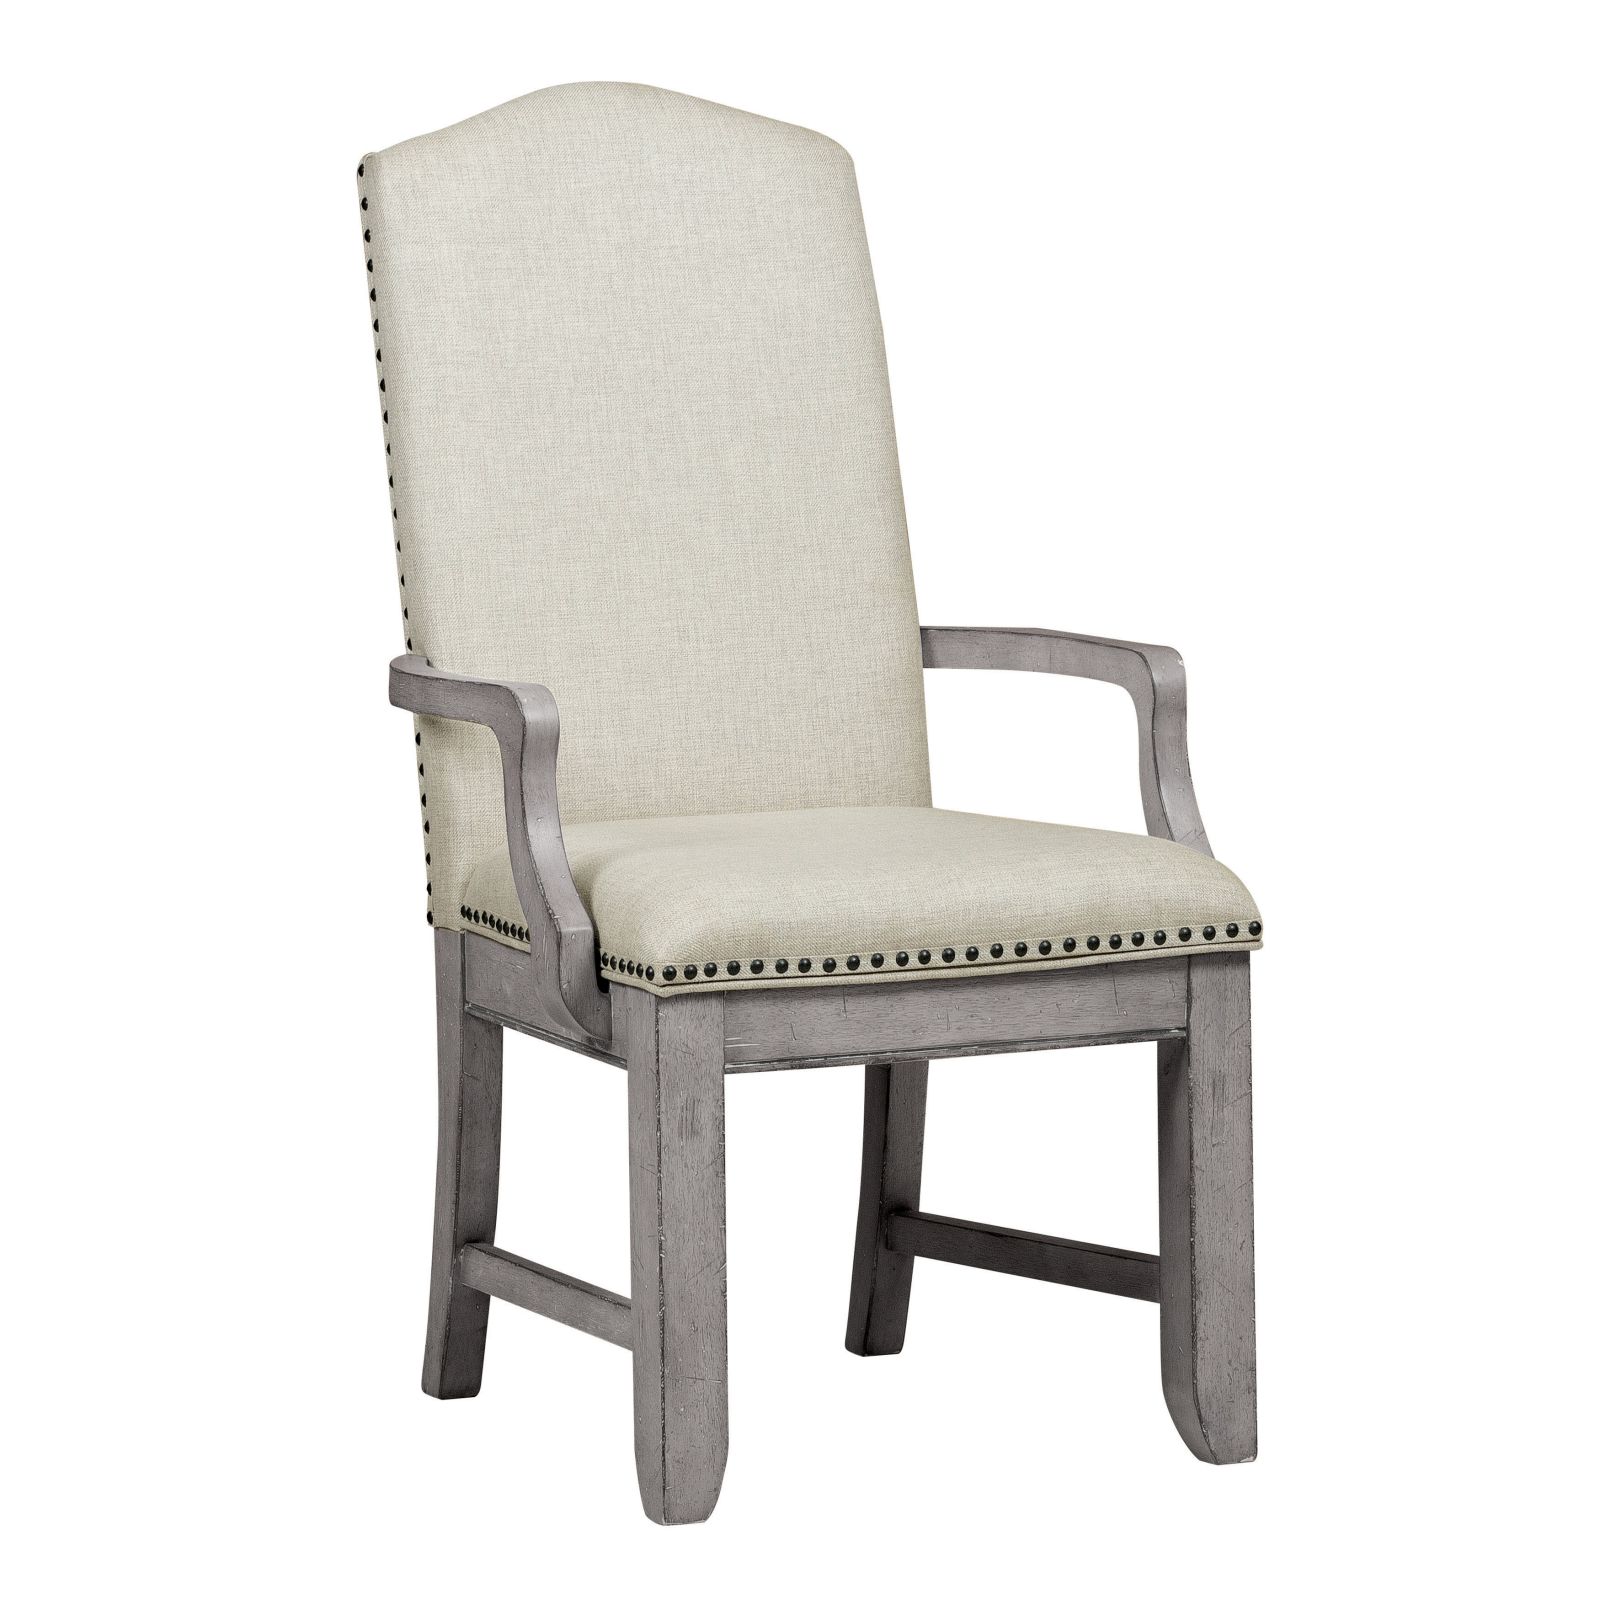 Prospect Hill Upholstered Arm Chair